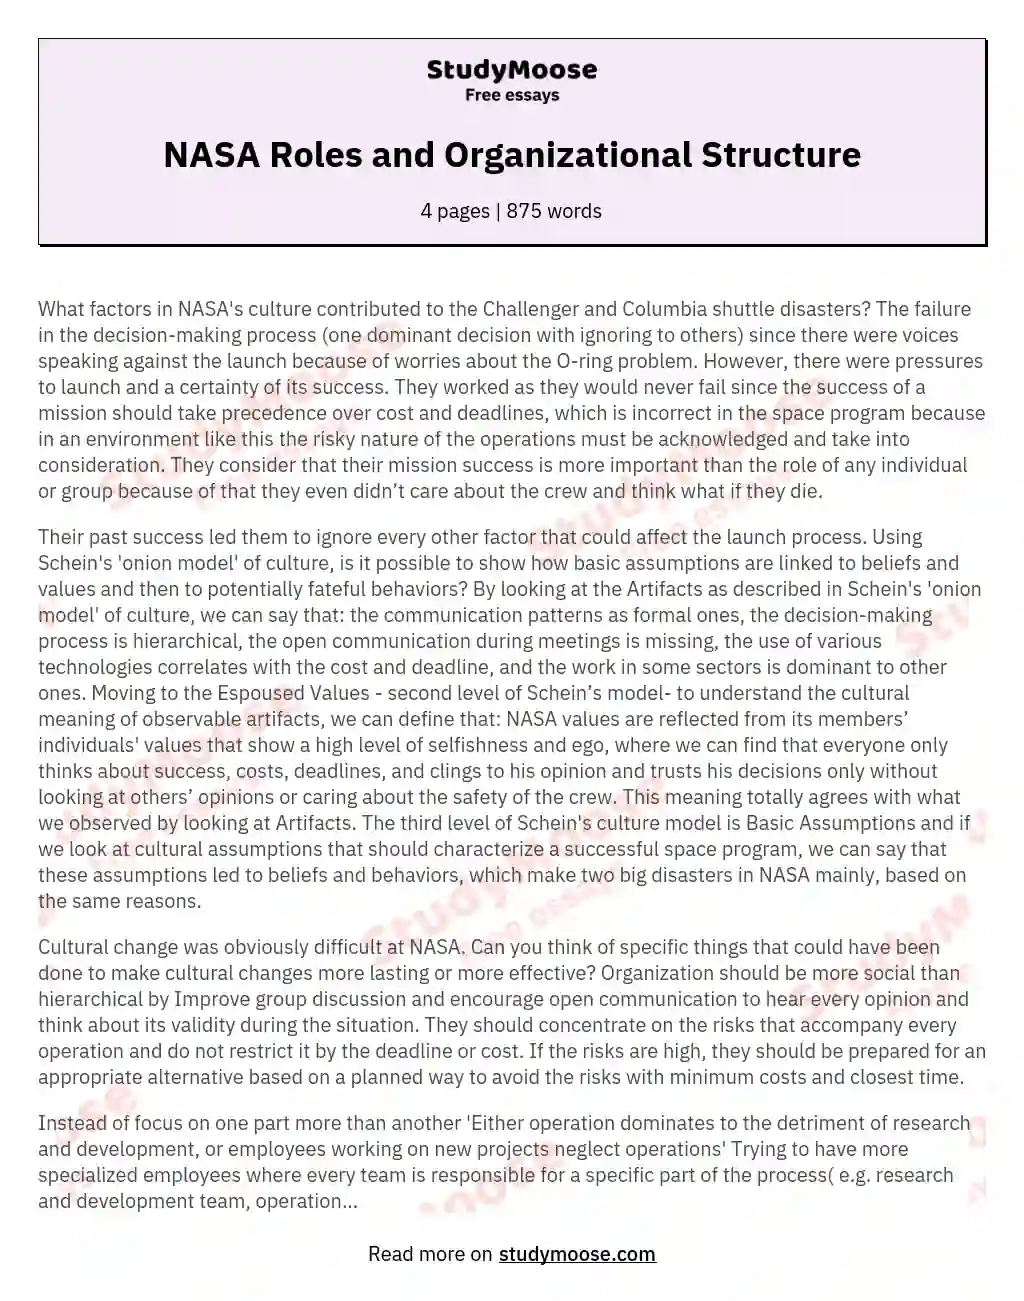 NASA Roles and Organizational Structure essay